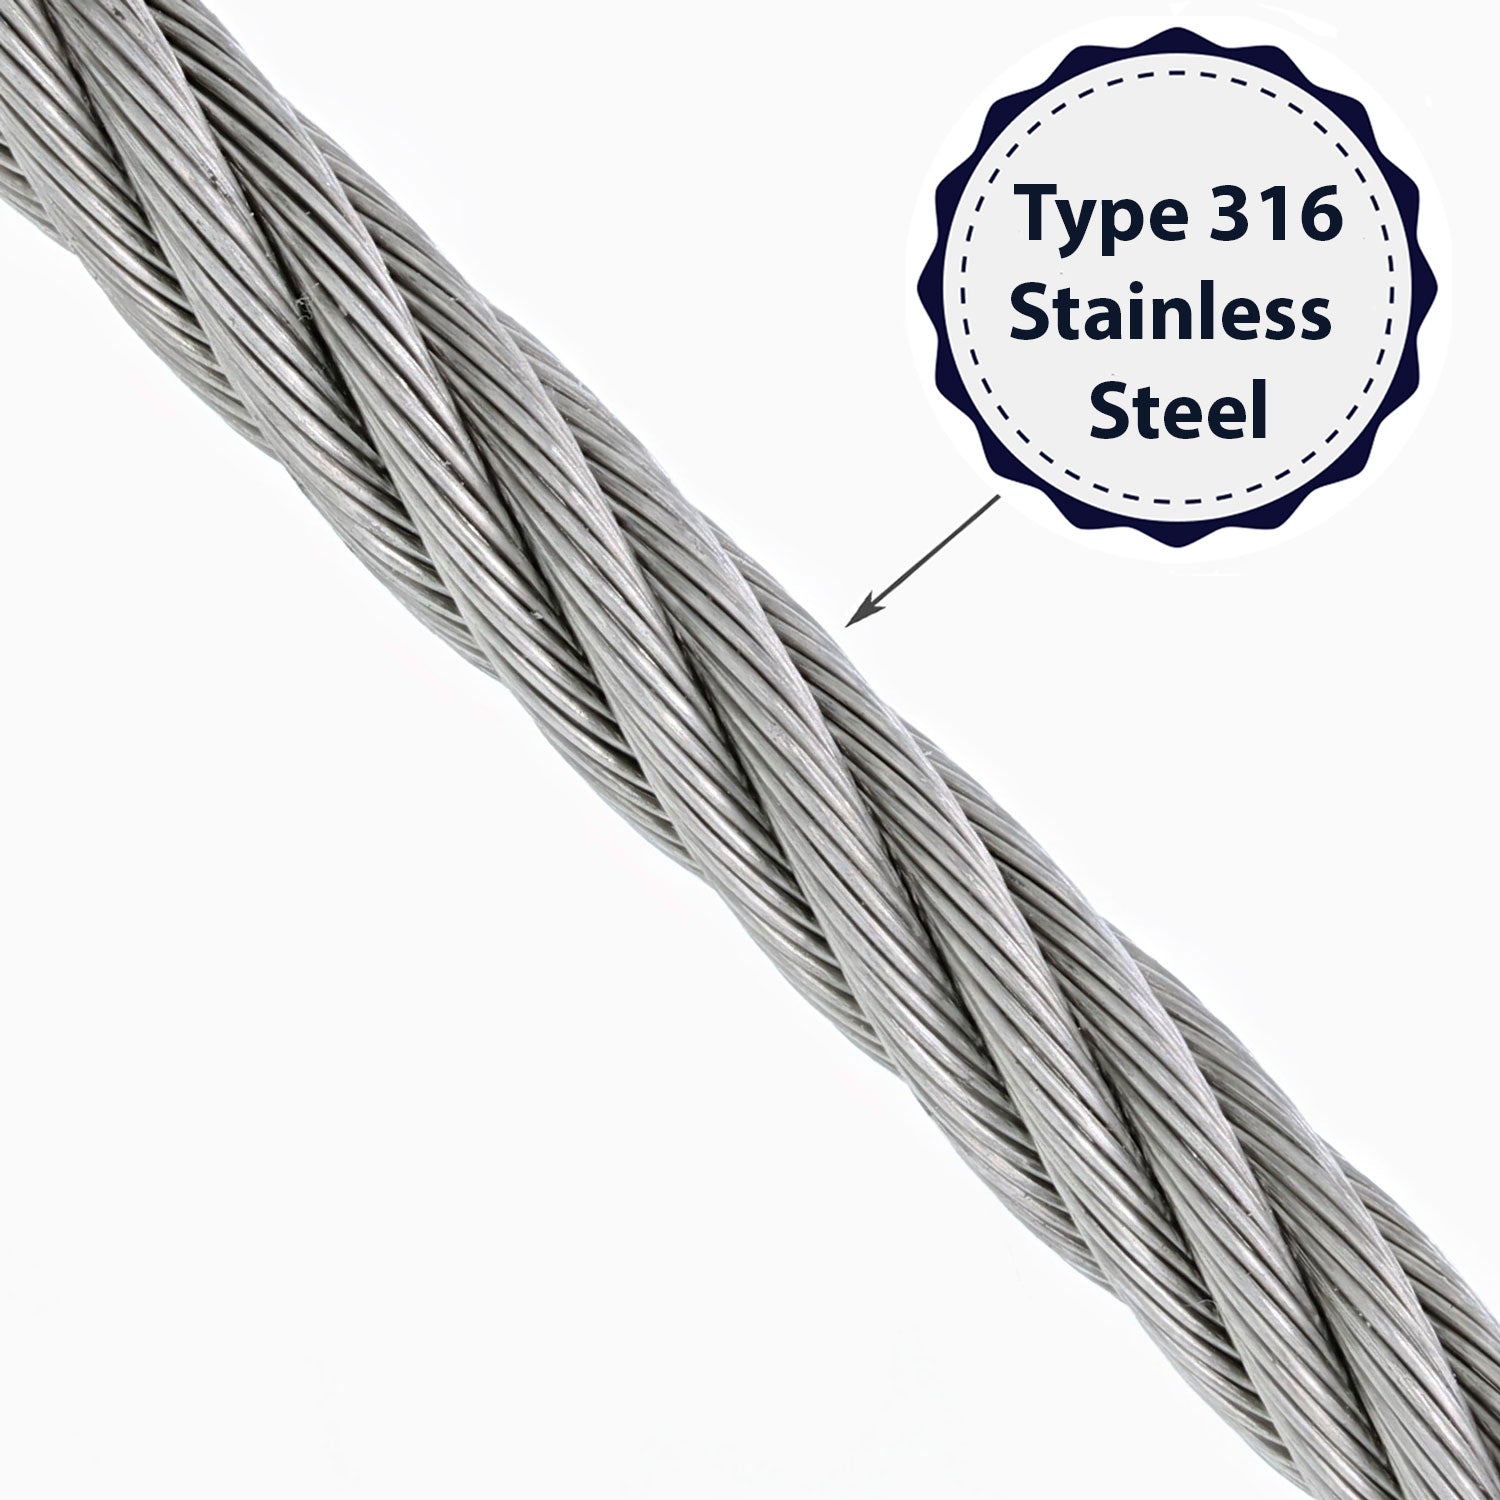 1/4" Stainless Steel Aircraft Cable Wire Rope 7x19 Type 316 350 Feet 